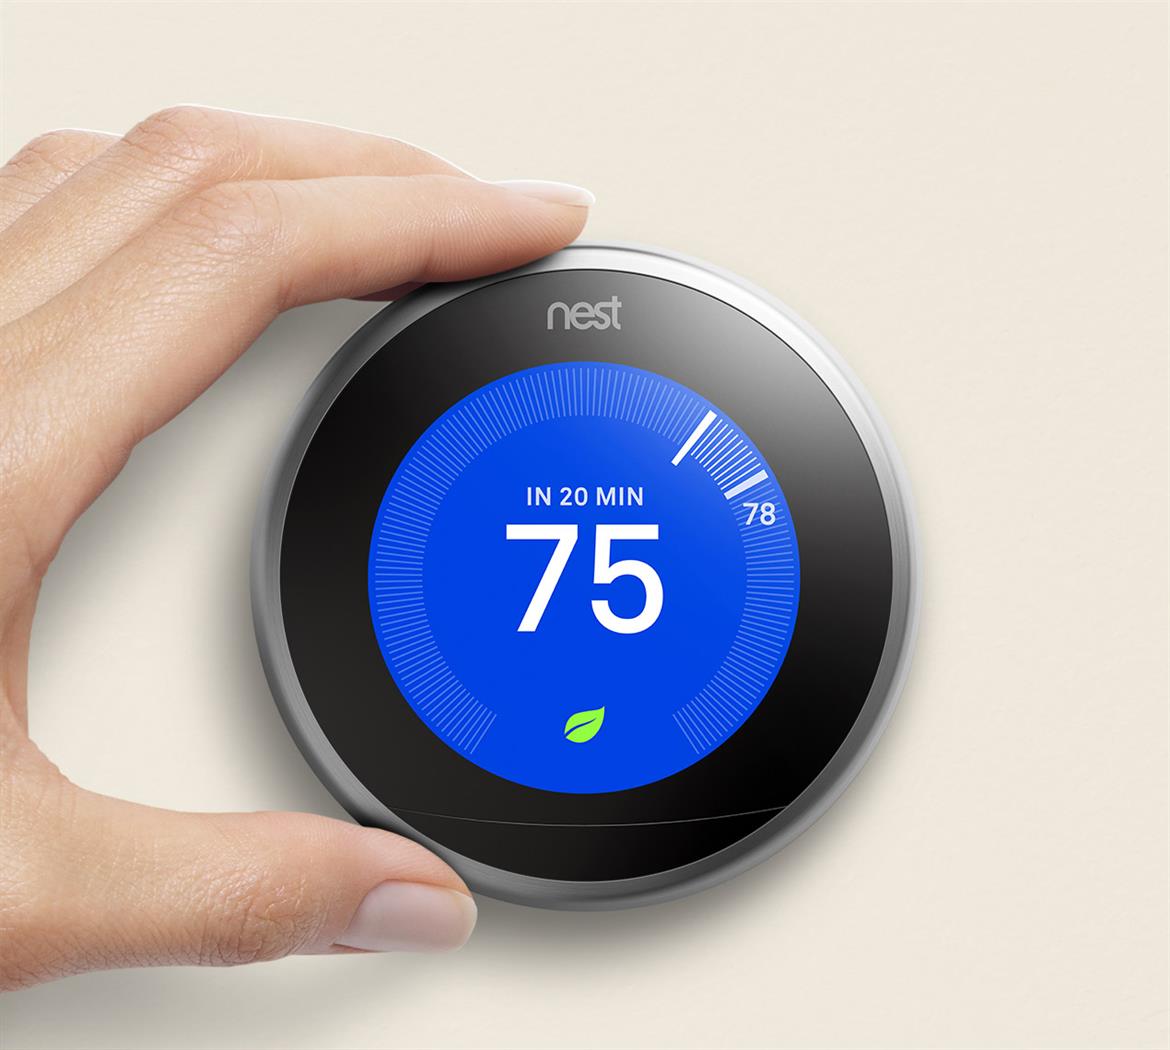 Google Updates Nest Thermostat With Larger Display, Slimmer Body And Bluetooth LE